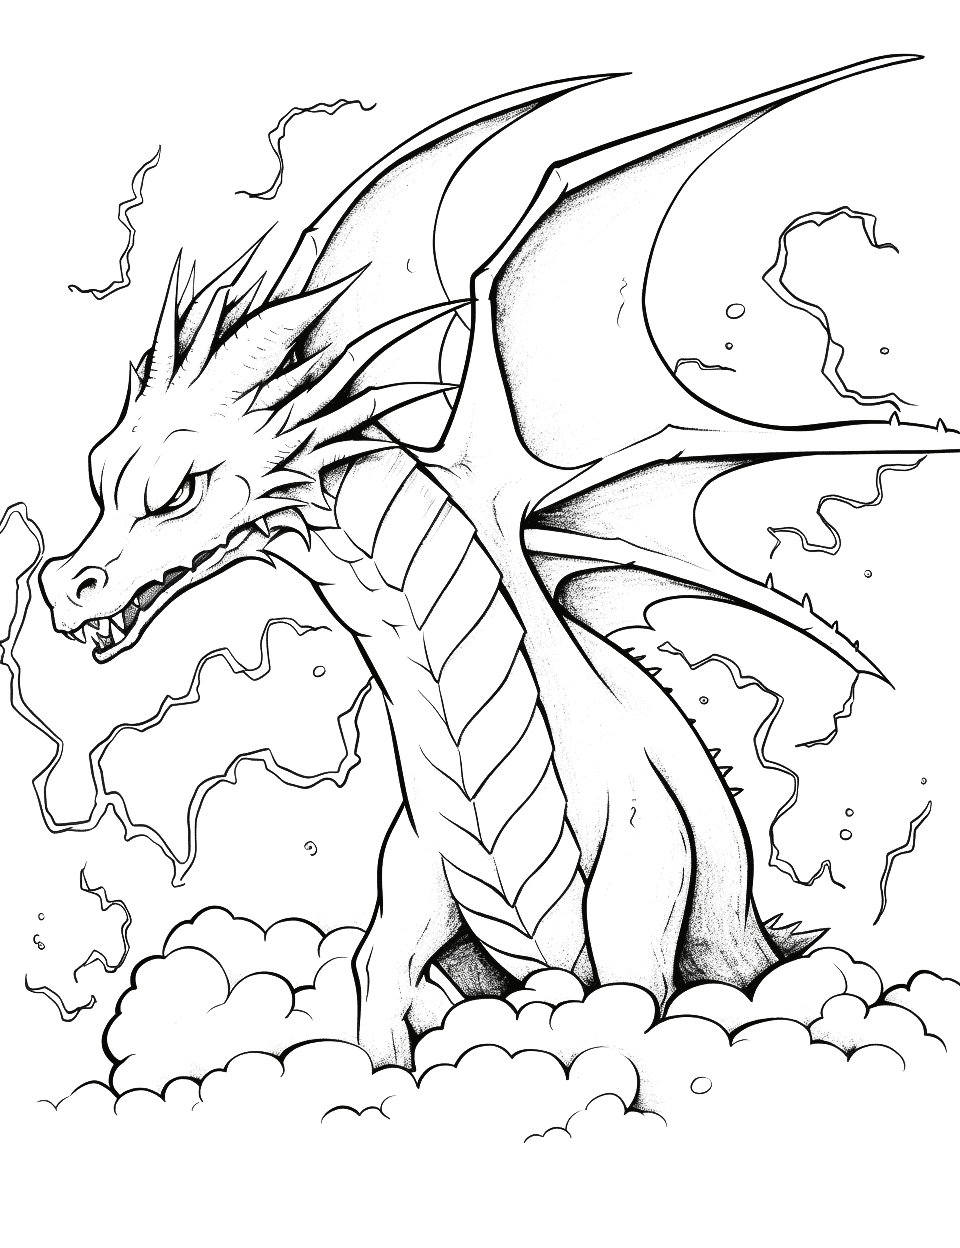 Lightning Dragon Coloring Page - A lightning dragon, sparking with energy, amidst a thunderstorm.